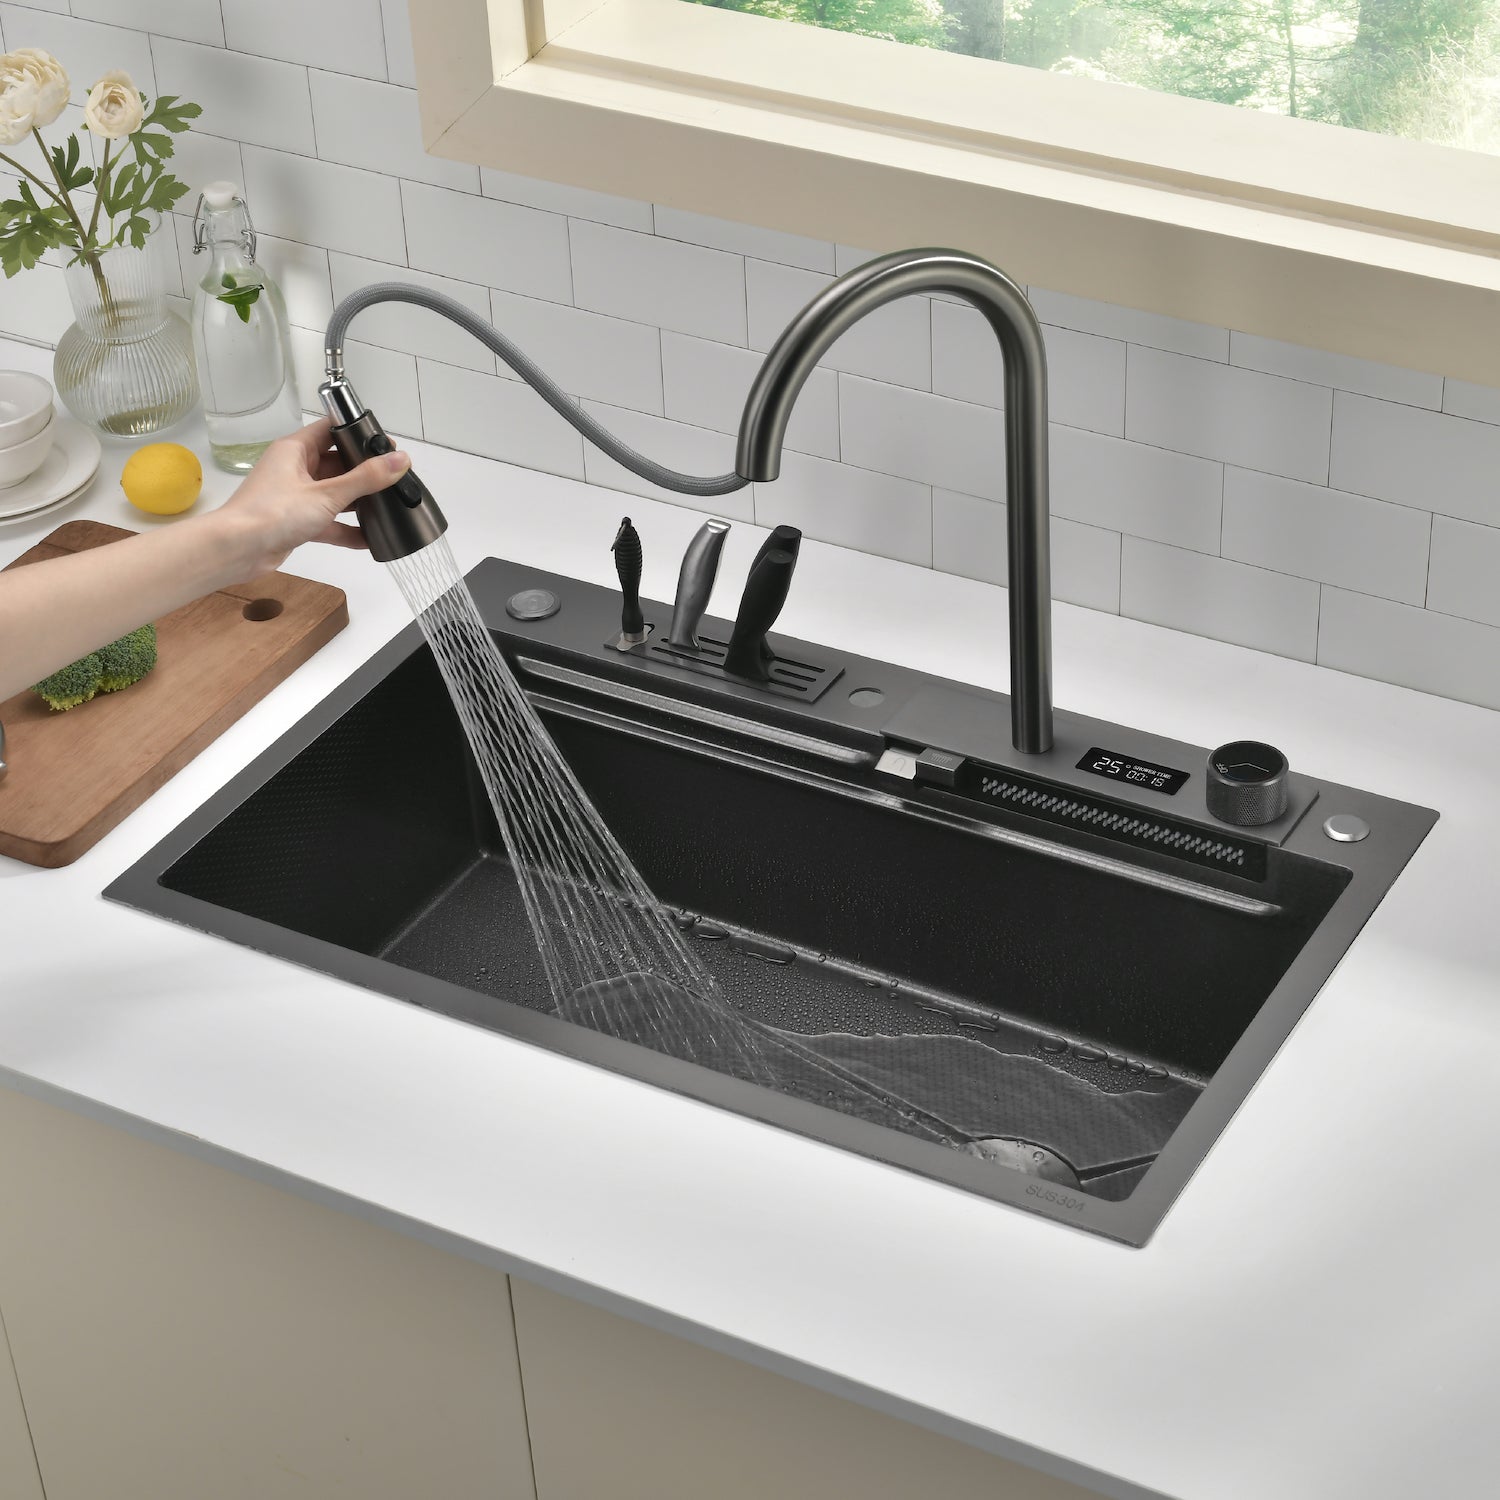 Lefton High Tech Kitchen Sink Set With Digital Temperature Display Waterfall Faucet & Knife Holder